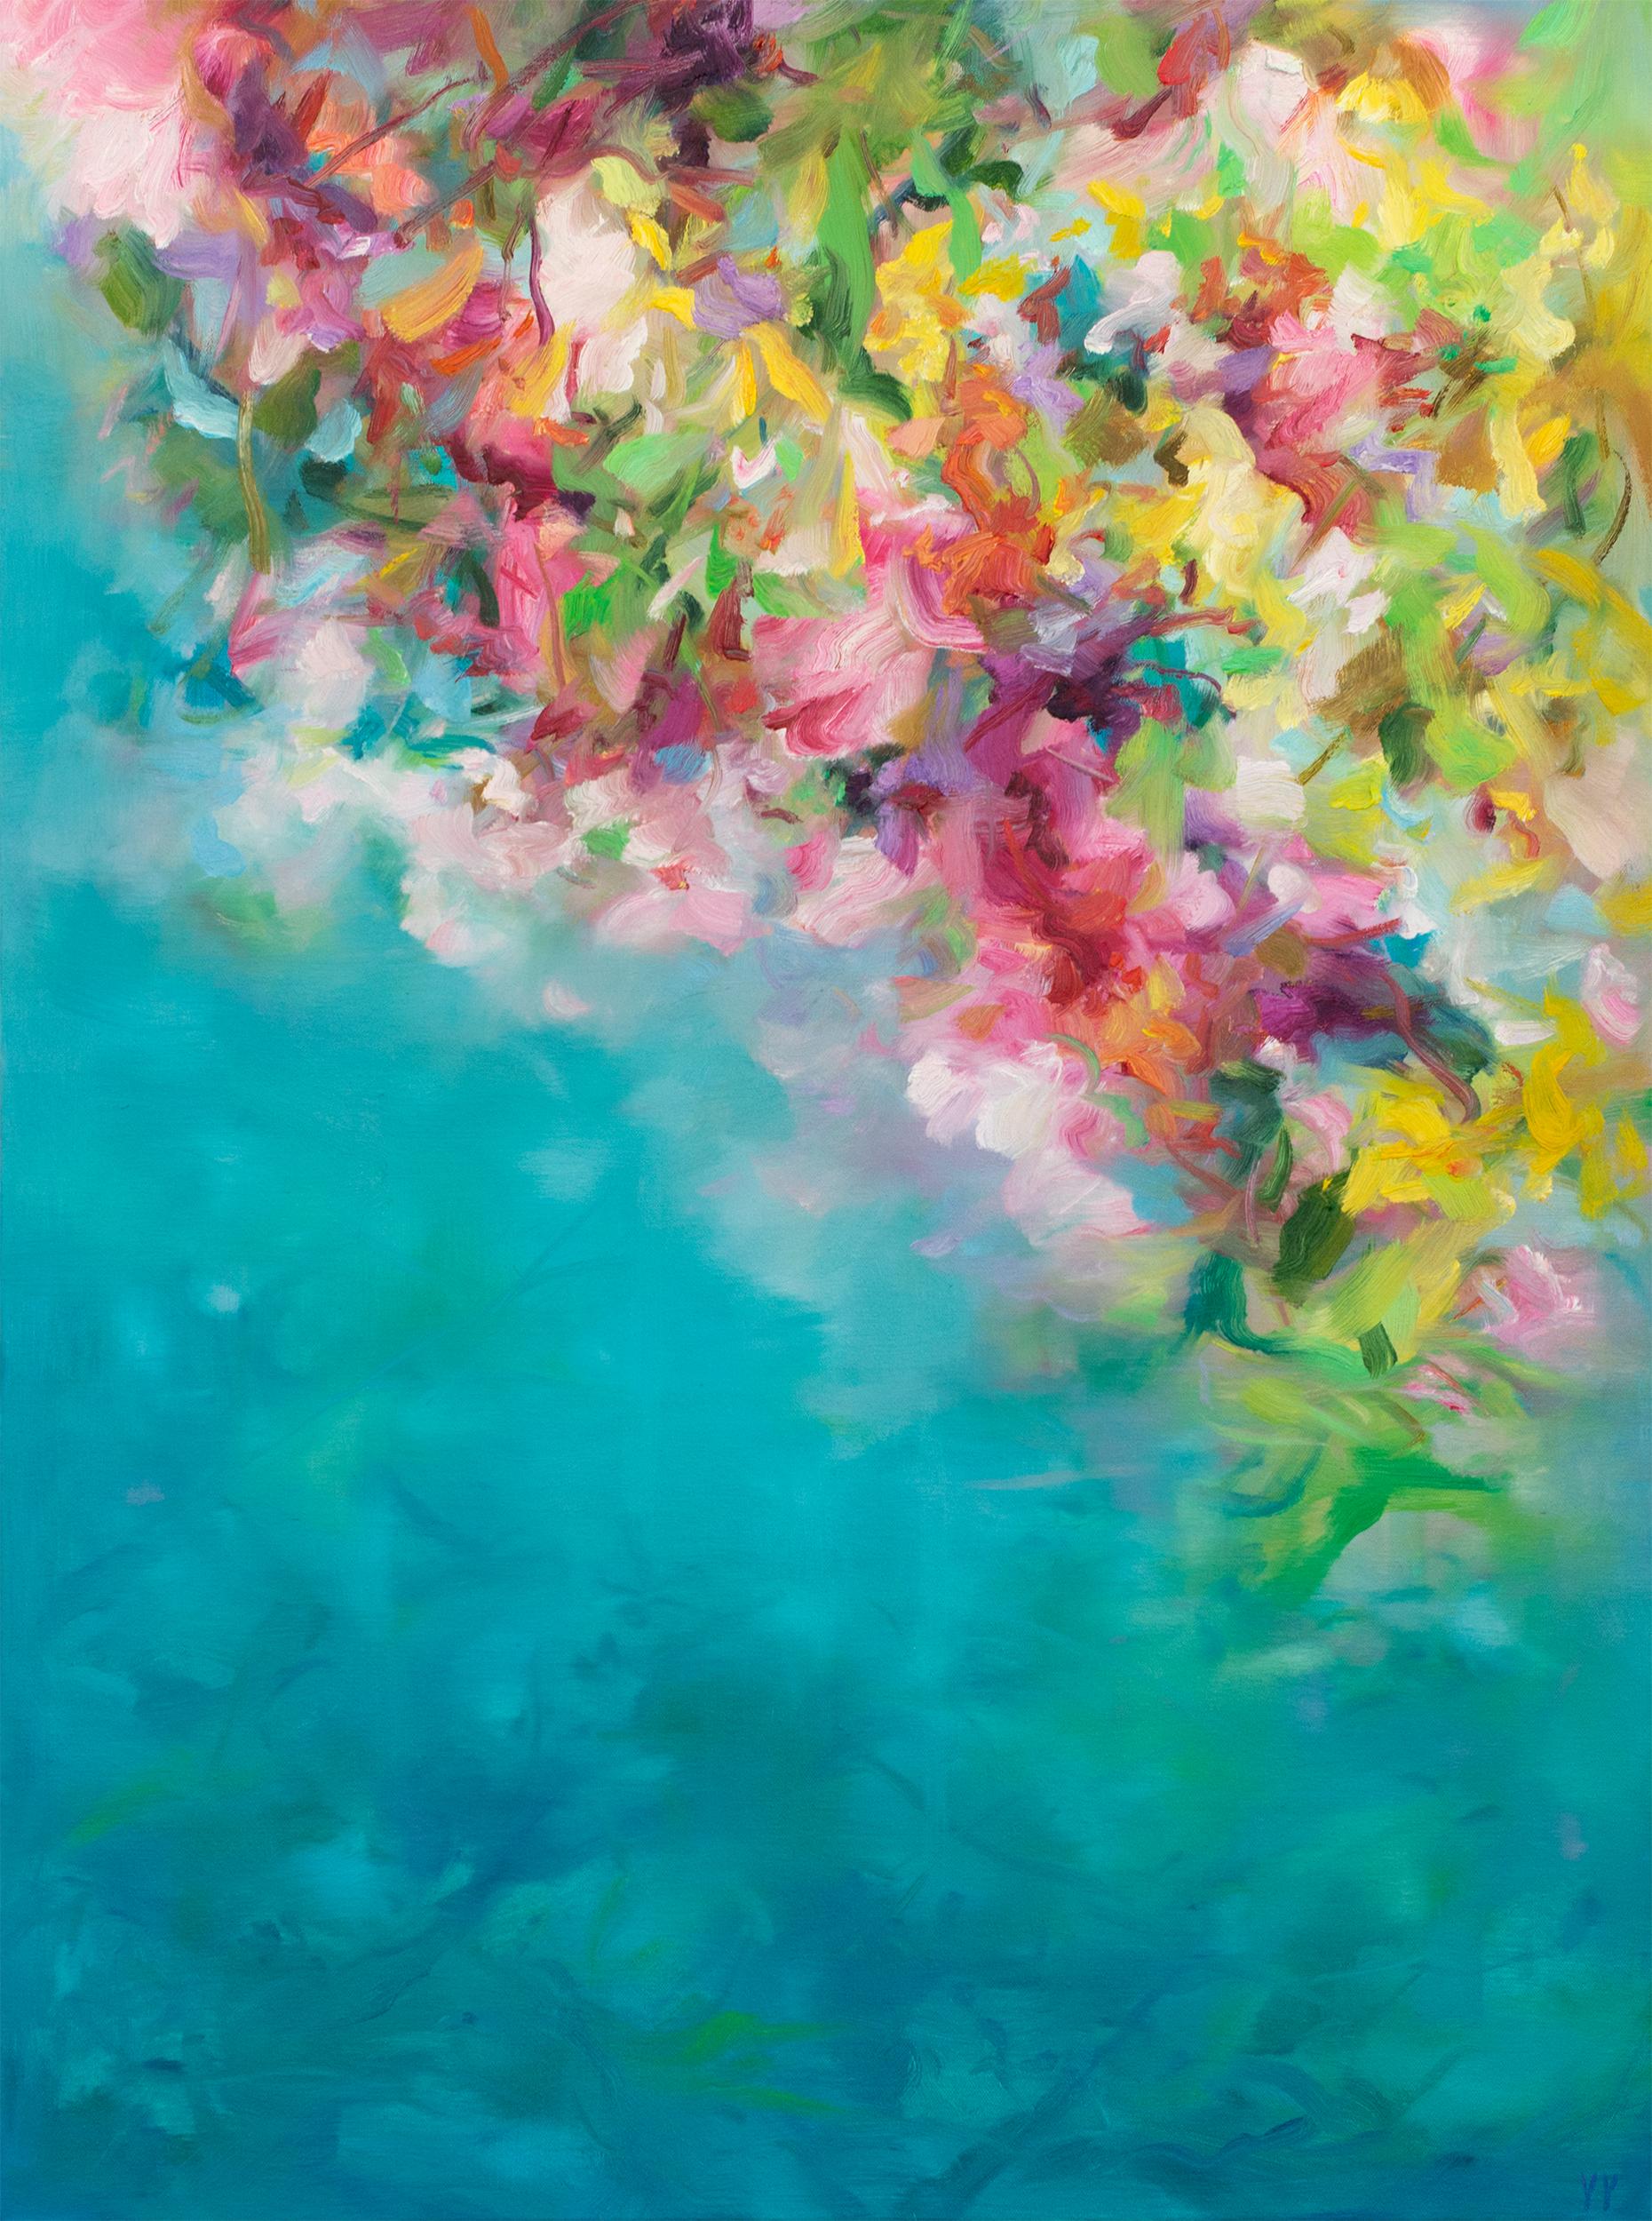 'Blooming Waterside' 2022 by Chinese/Canadian artist Yangyang Pan. Oil on canvas, 40 x 30 in. This beautiful abstract-expressionistic painting incorporates gestural, floral brushstrokes in bold colors of pink, yellow, green, purple, with a blue area